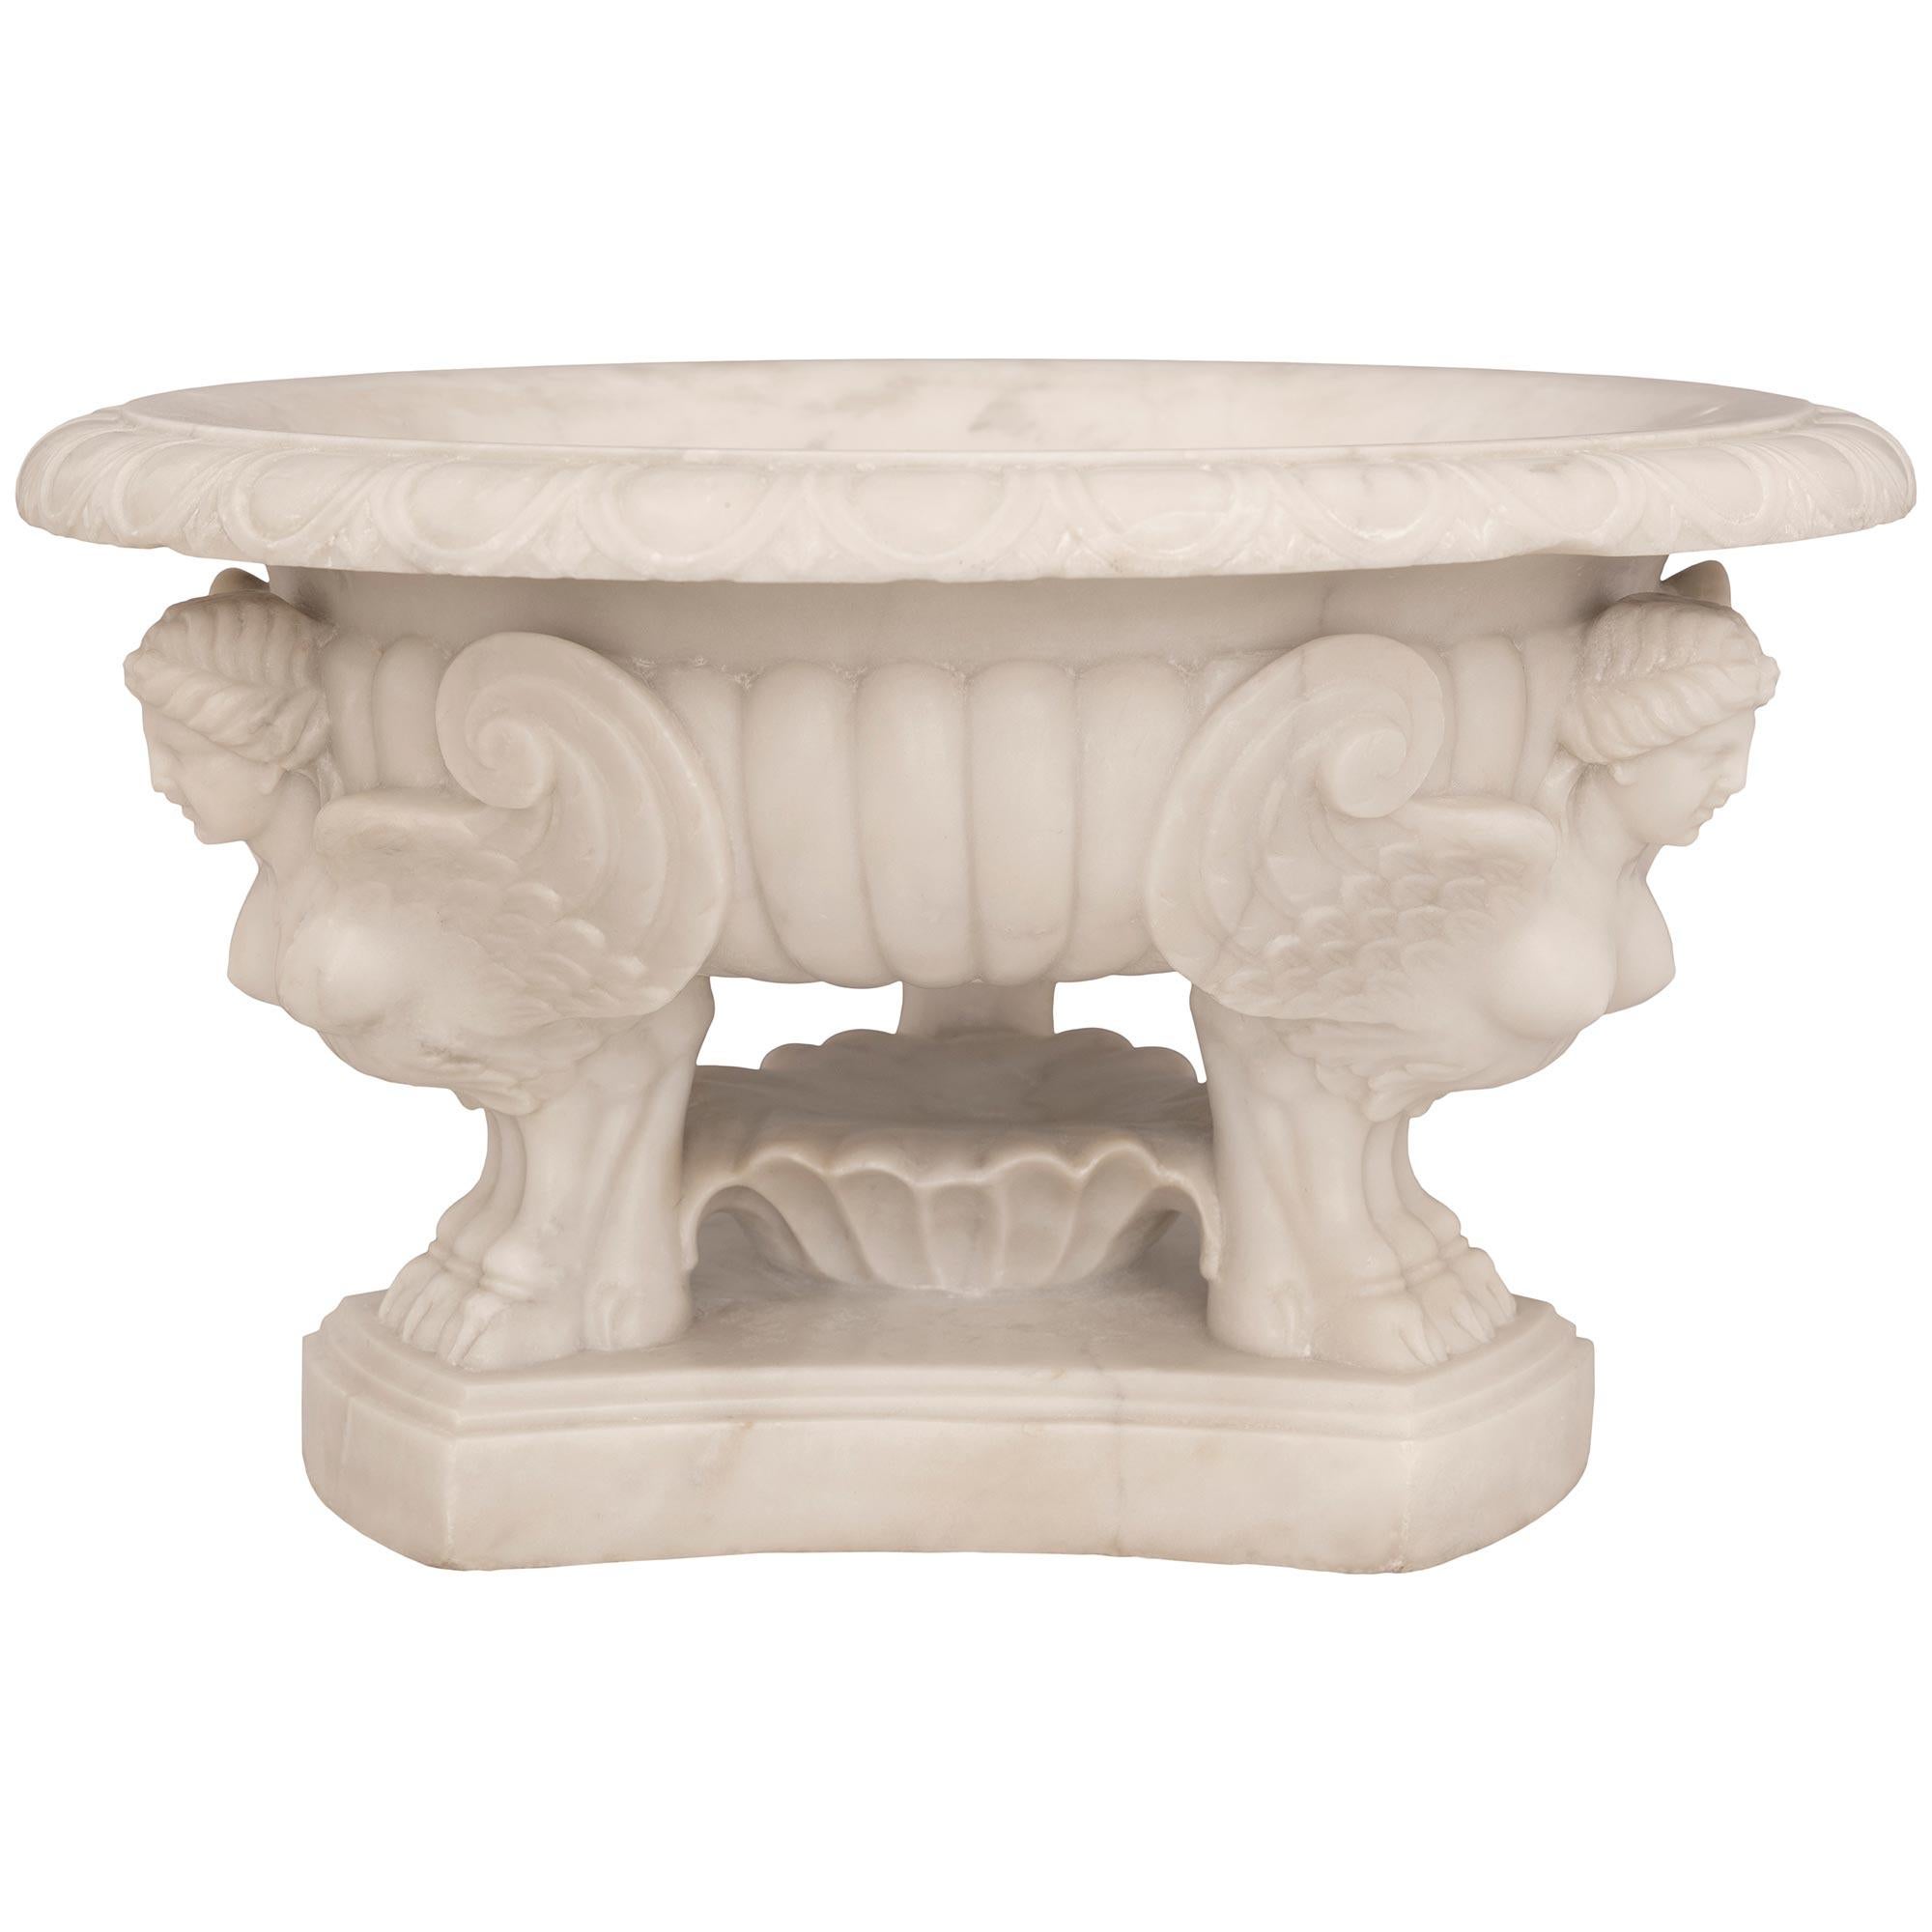 Italian 19th Century Neo-Classical St. White Carrara Marble Centerpiece Bowl In Good Condition For Sale In West Palm Beach, FL